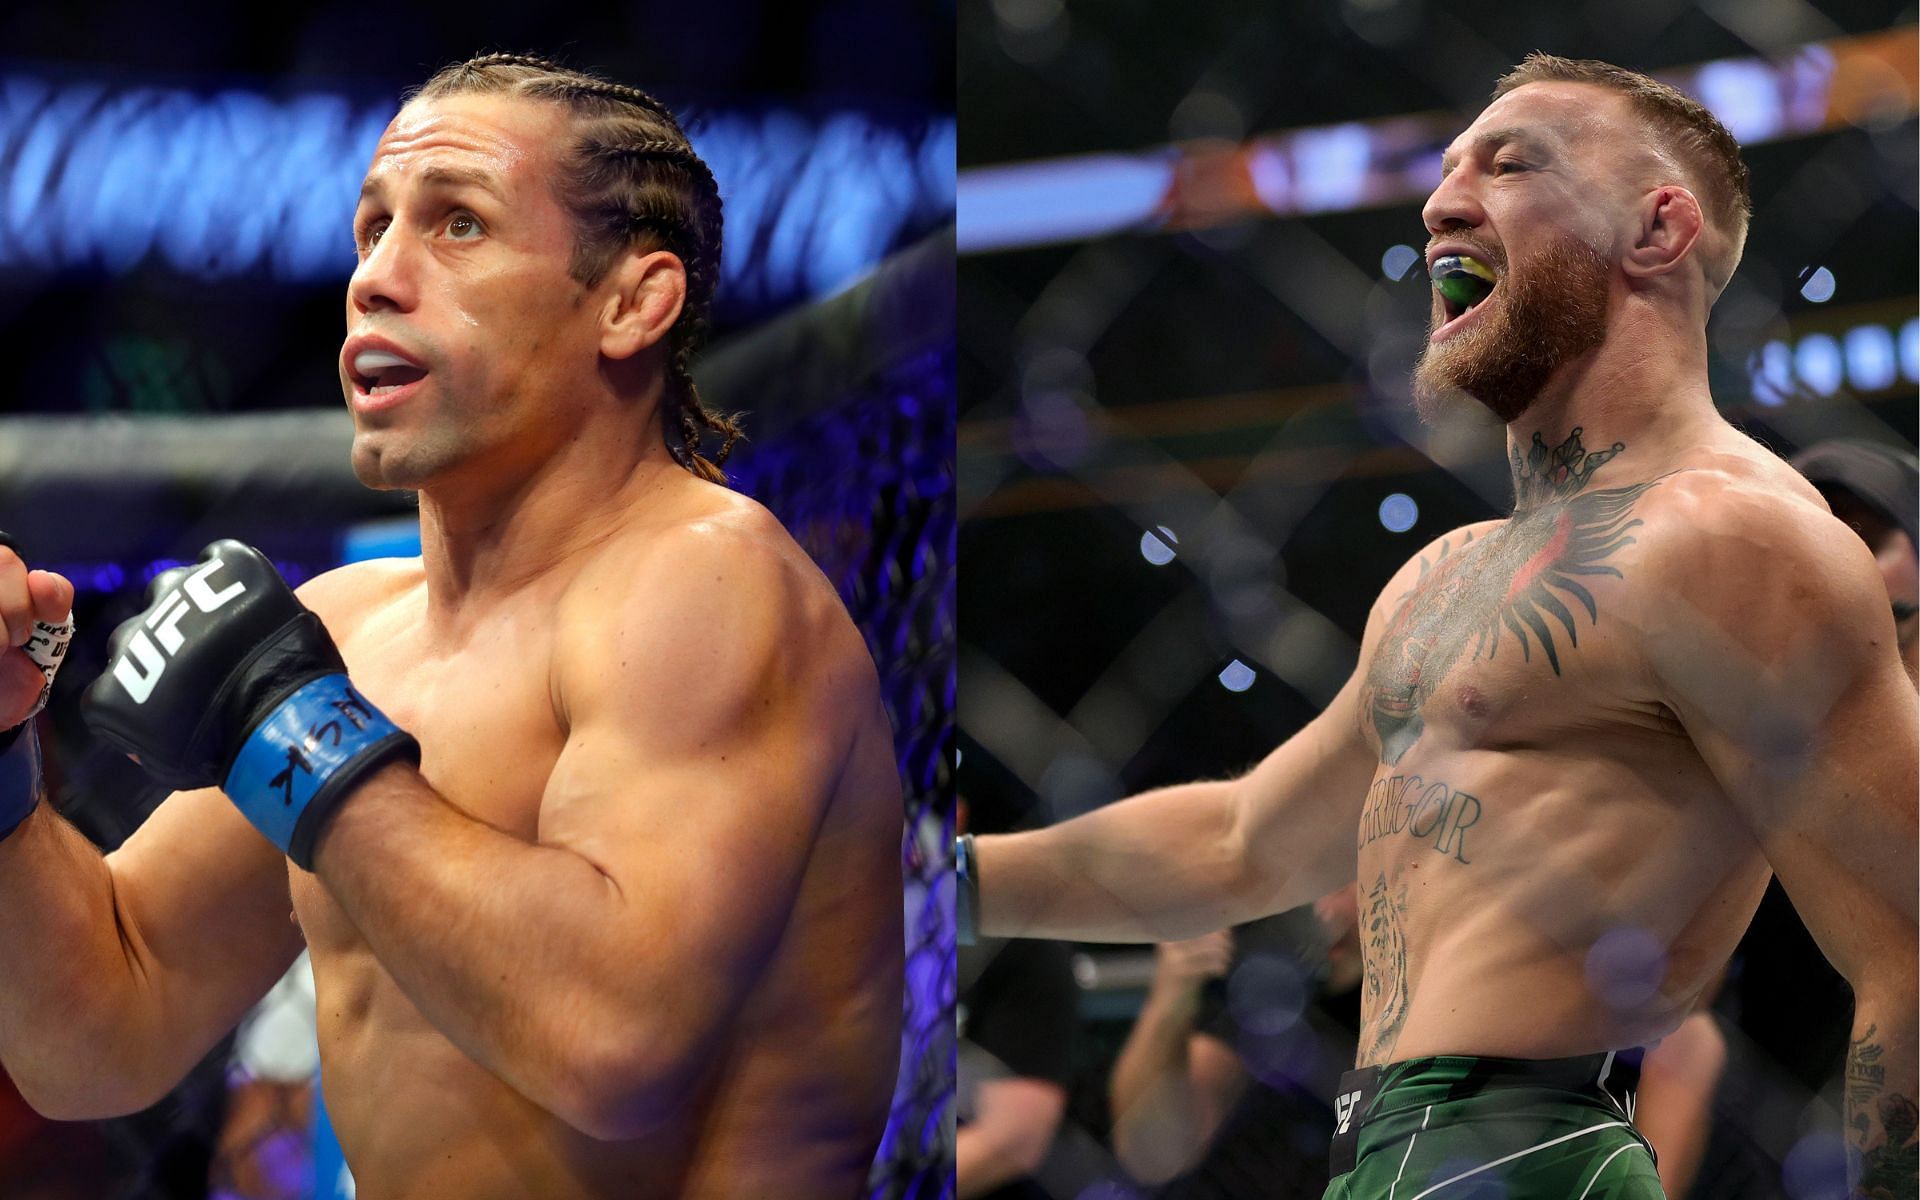 Urijah Faber (left) and Conor McGregor (right)